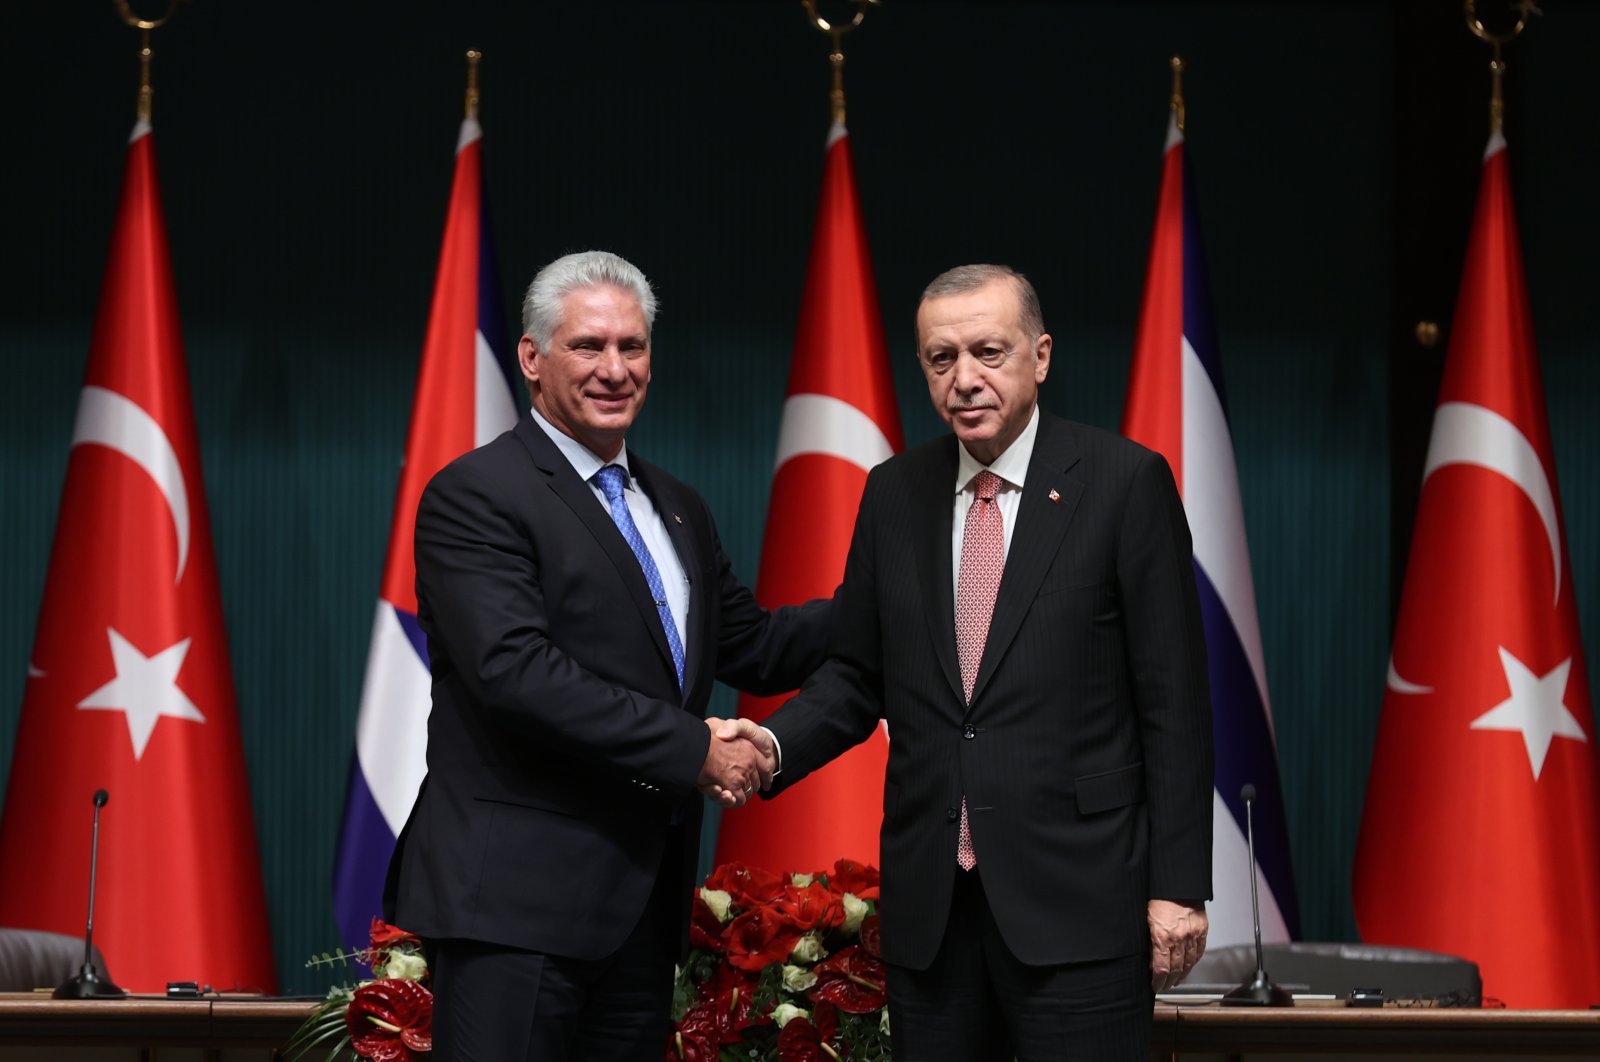 President Recep Tayyip Erdoğan (R) is seen during a joint press conference with his Cuban counterpart Miguel Diaz-Canel at the presidential complex in the capital Ankara, Türkiye, Nov. 23, 2022 (DHA Photo)